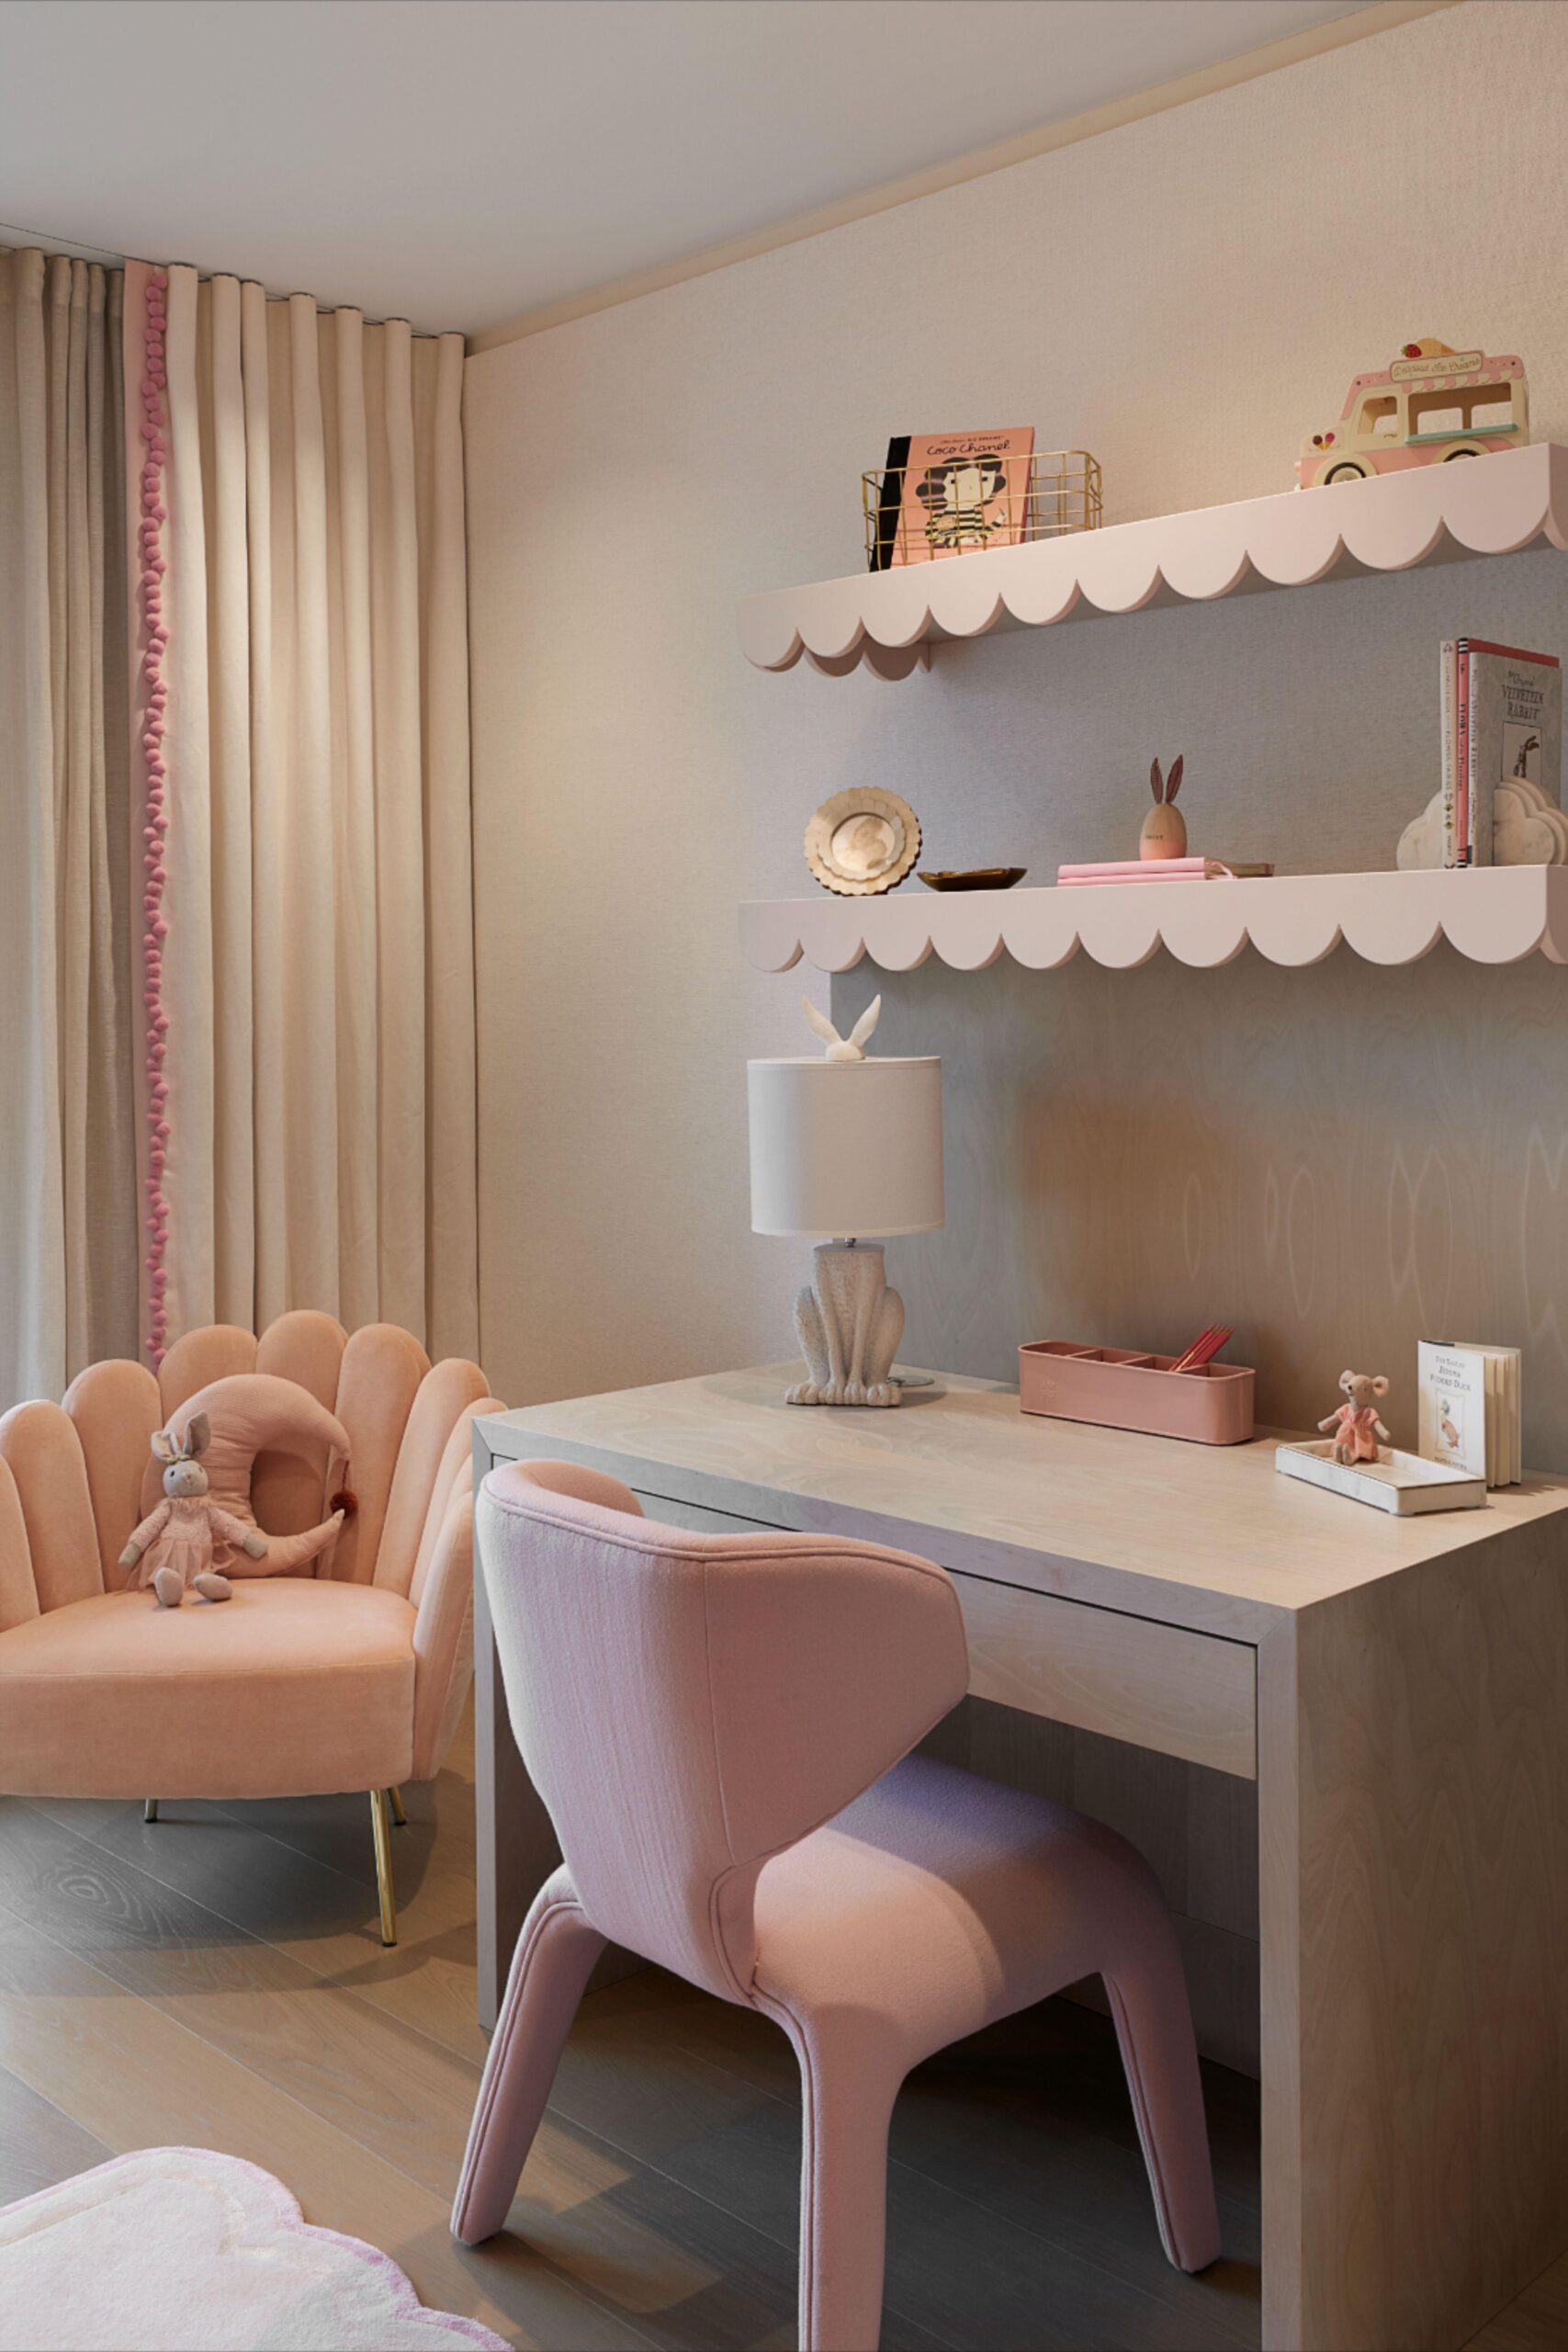 Little Girl Bedroom Design : Cute and Cozy Little Girl Bedroom Design Ideas to Inspire Your Next Project